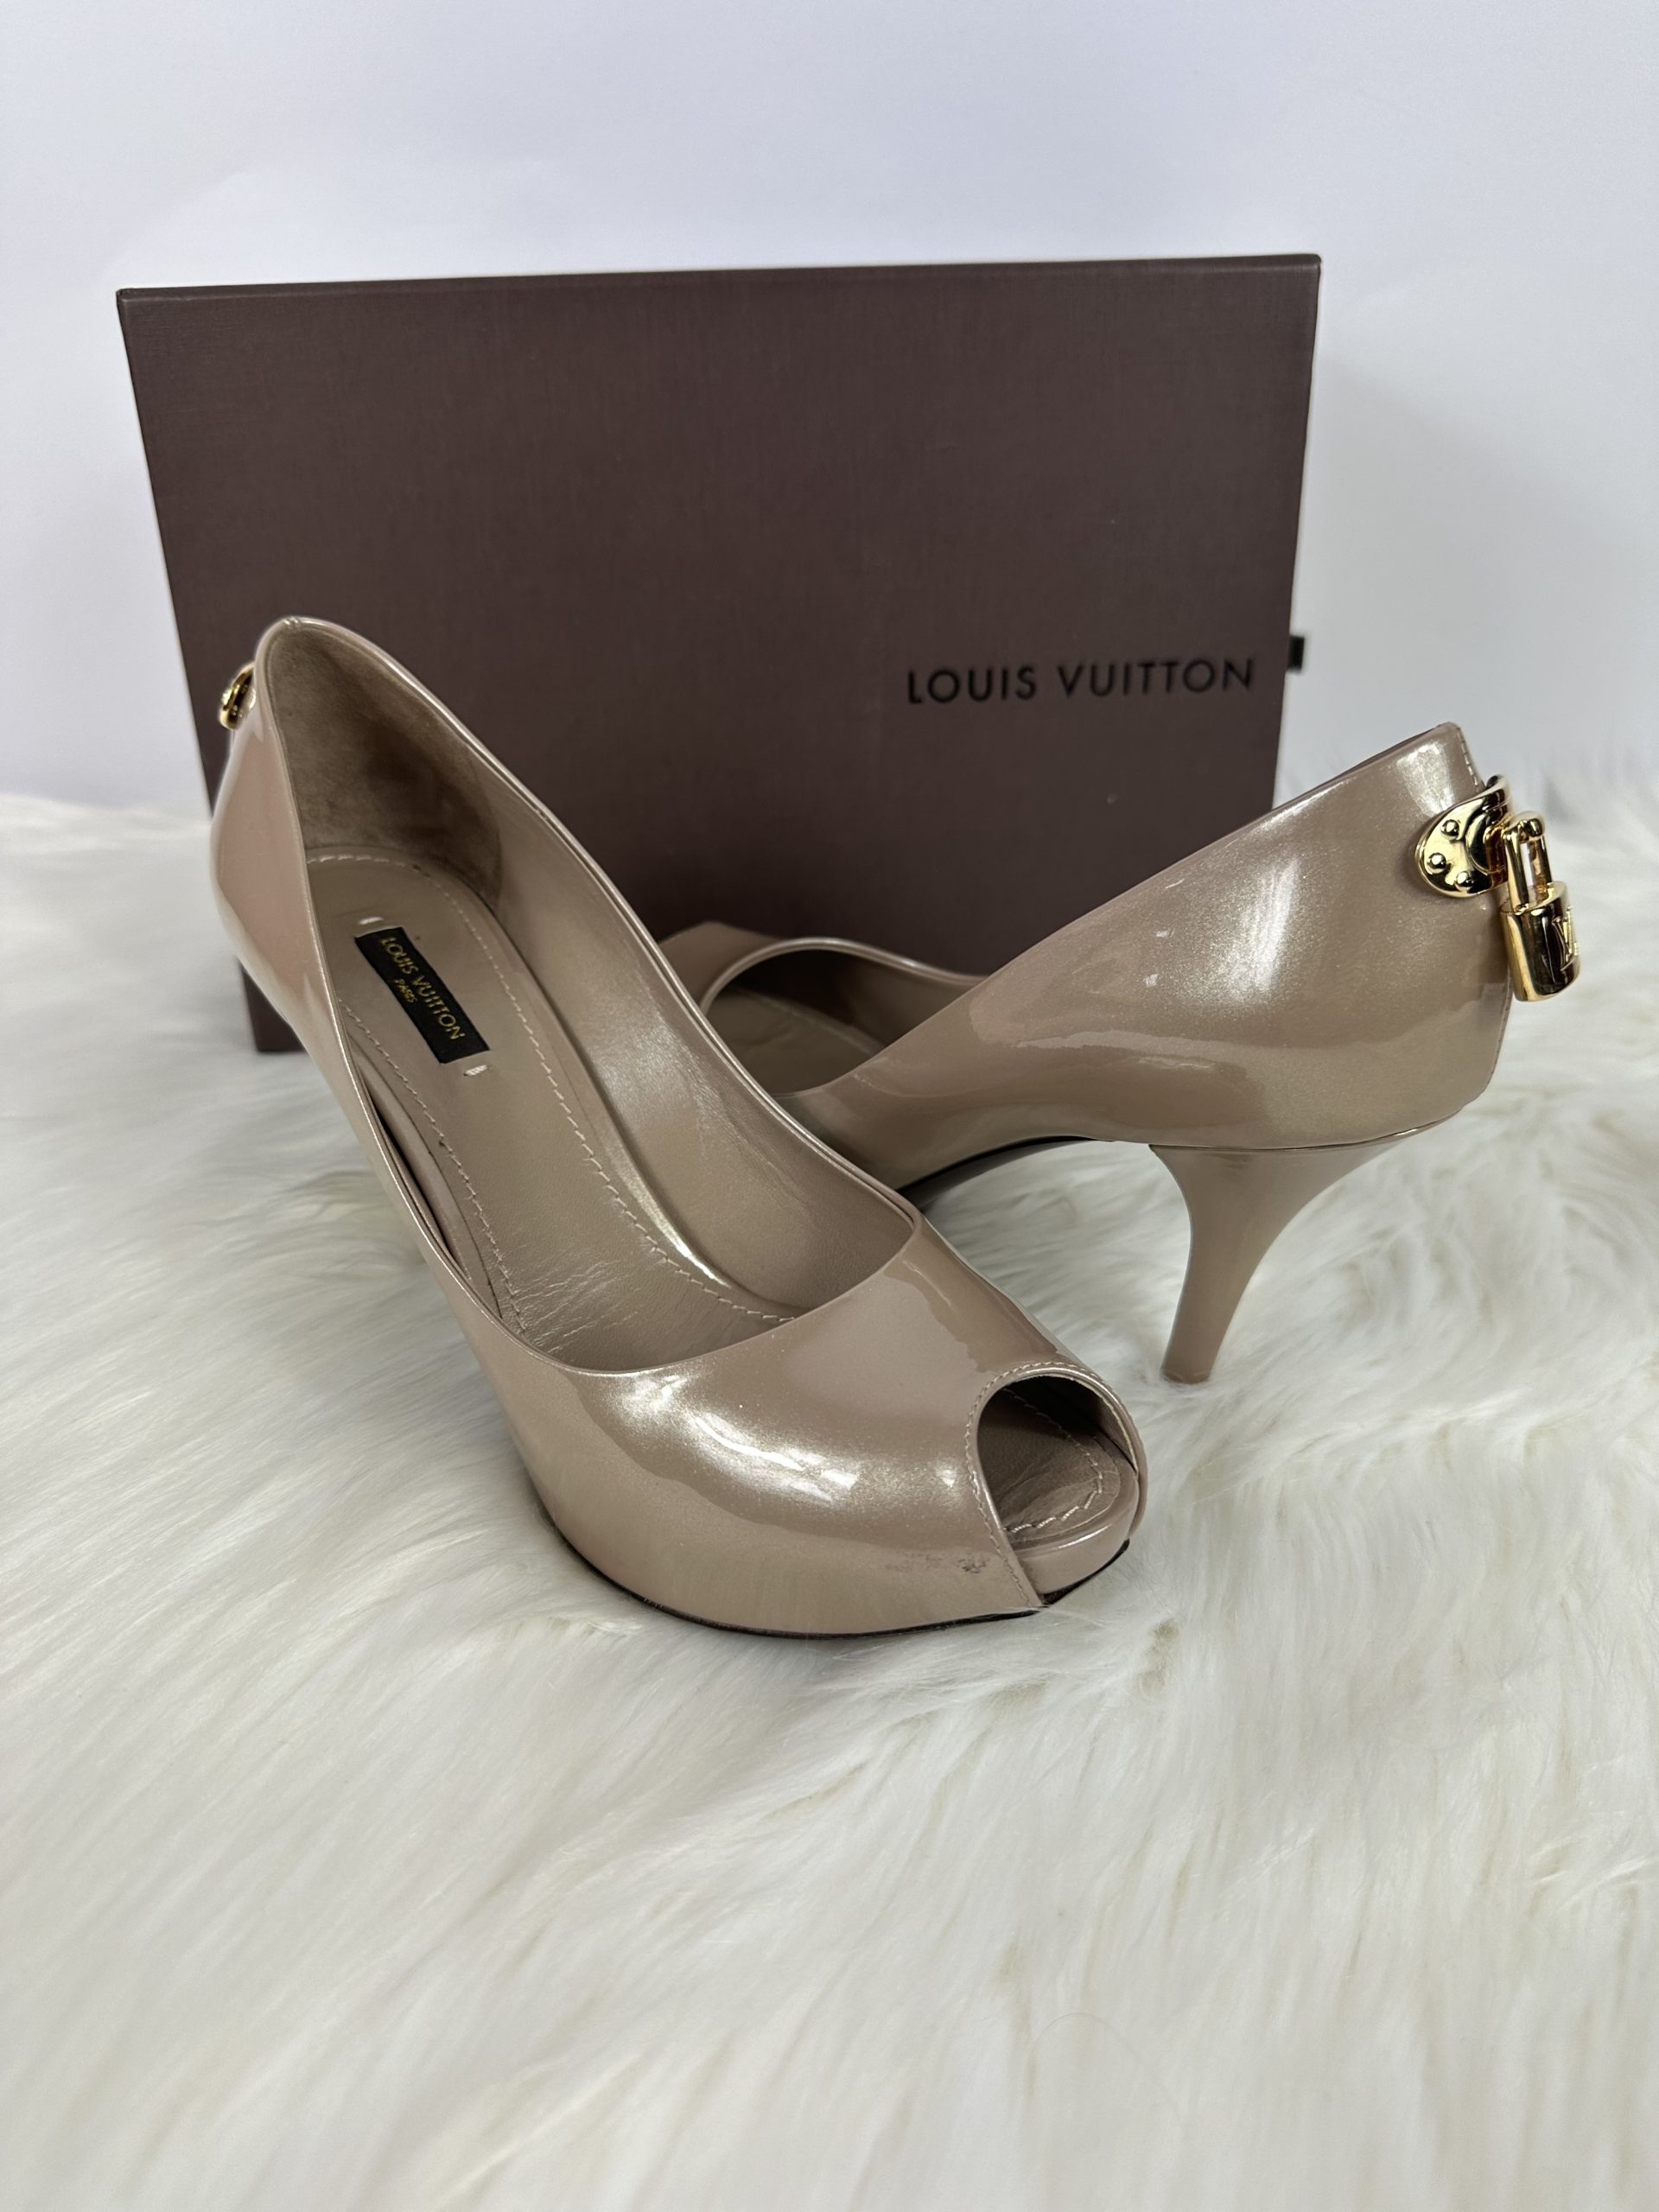 Louis Vuitton Beige Glitter Patent Leather Oh Really! Peep Toe